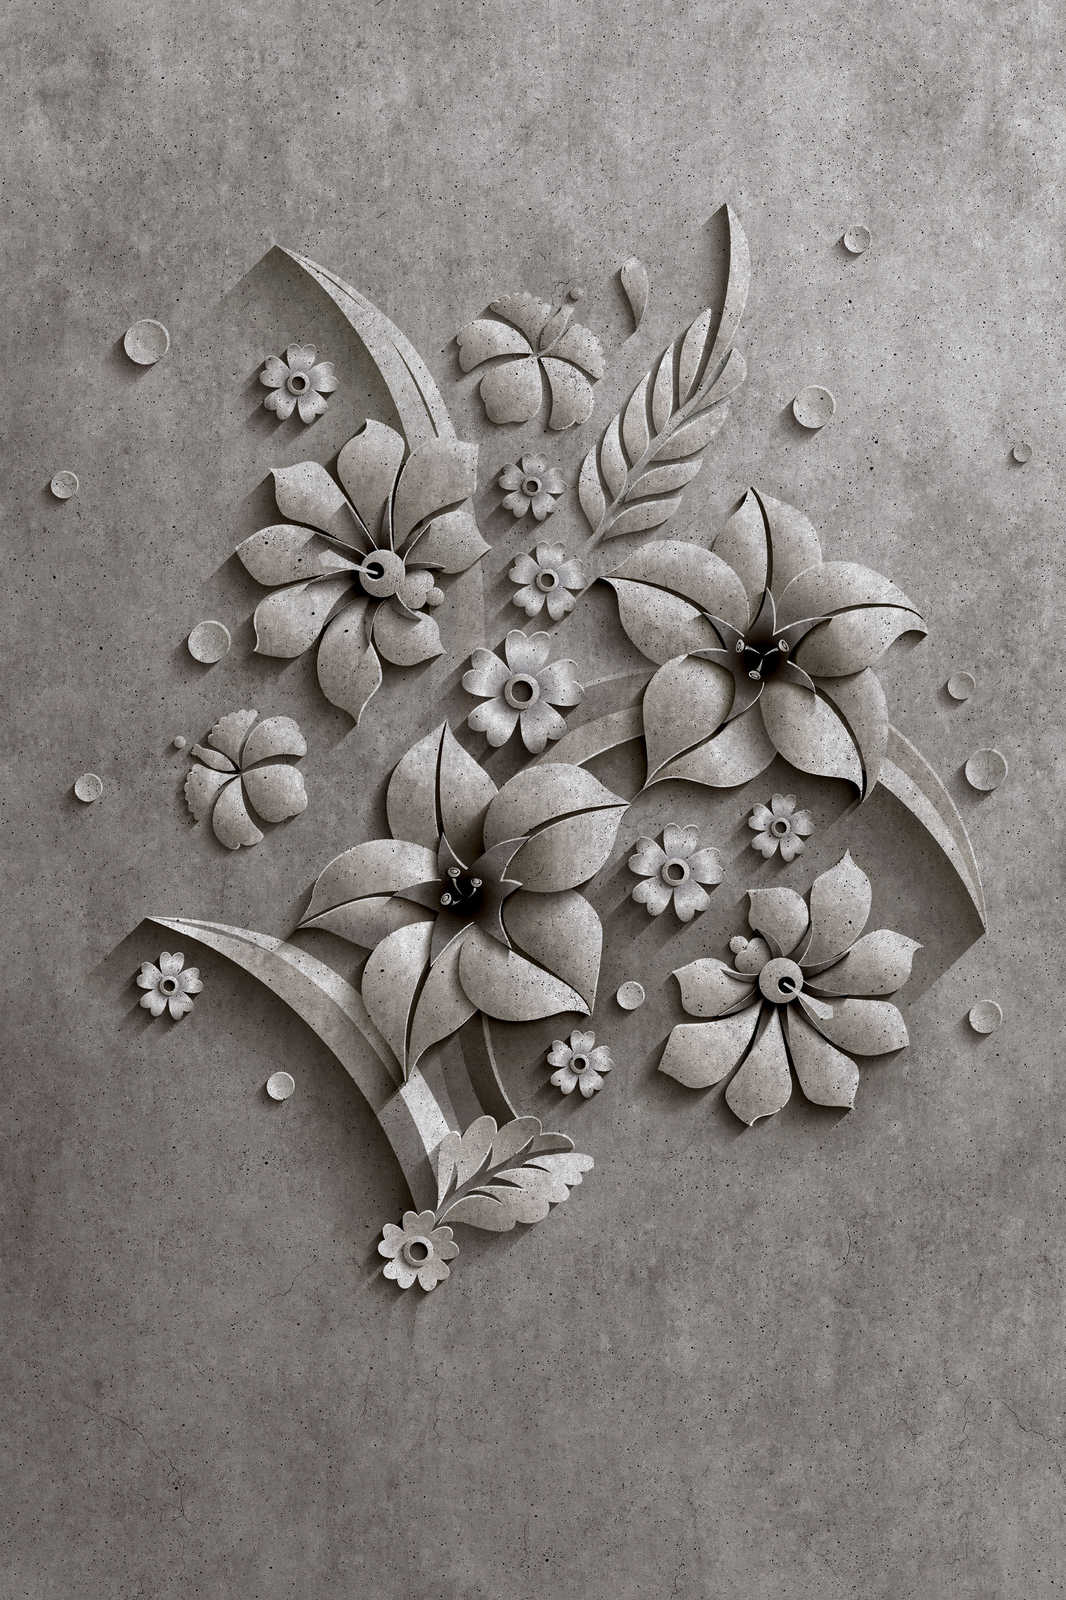             Relief 1 - Canvas painting in concrete structure of a flower relief - 0.90 m x 0.60 m
        